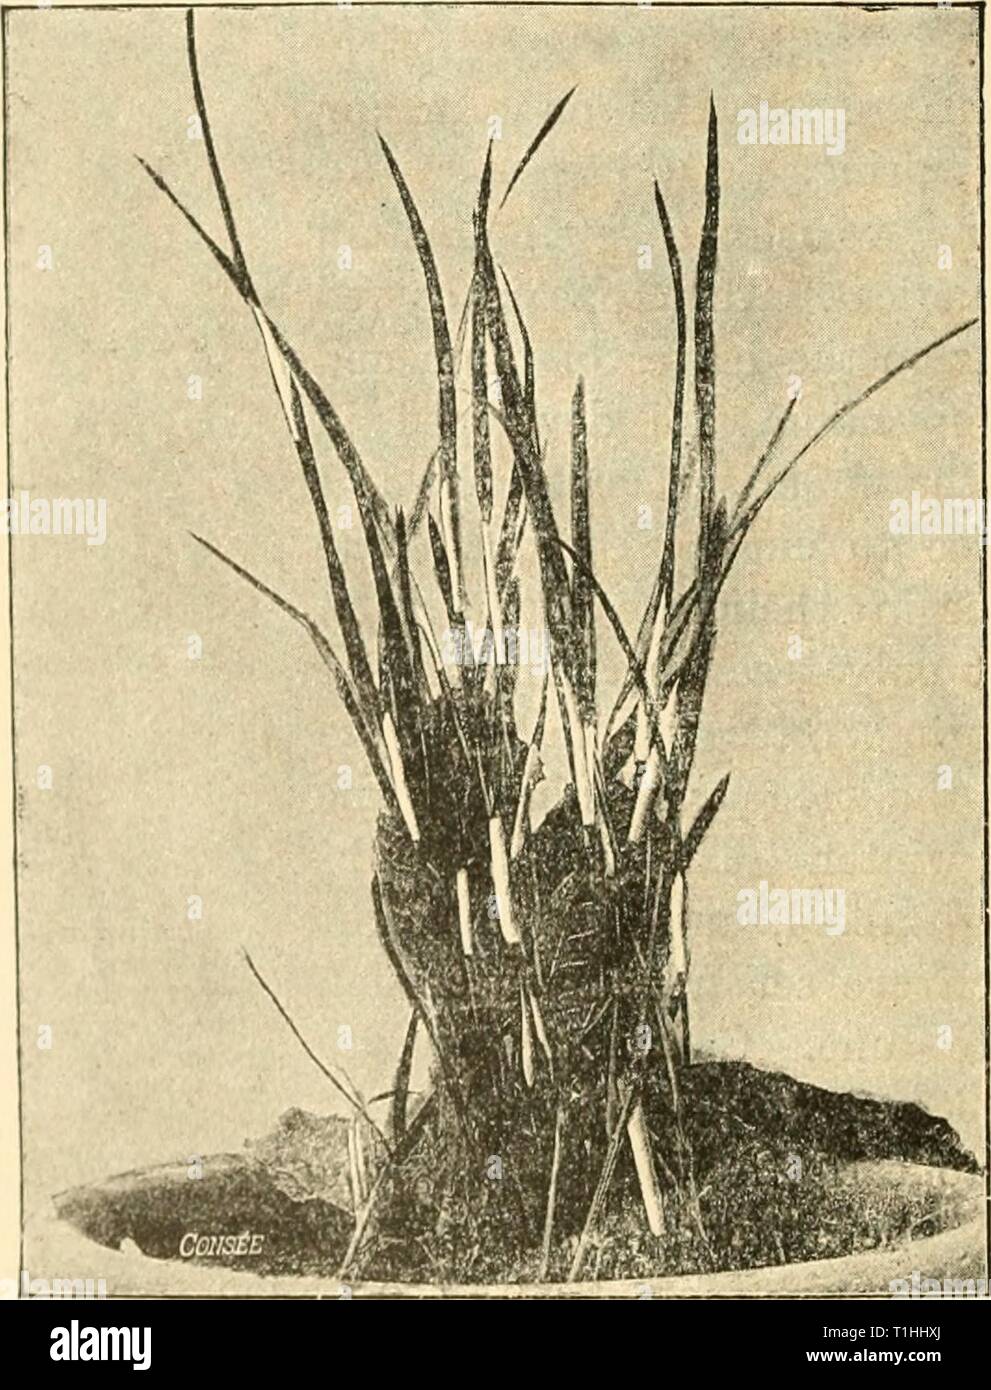 Diseases of plants induced by Diseases of plants induced by cryptogamic parasites; introduction to the study of pathogenic Fungi, slime-Fungi, bacteria, & Algae  diseasesofplants00tube Year: 1897  190 A8C0MYCETES. fertilise the trichogyiie and cause it to develop as an ascogoniuni. P. ochraceum (Wahlenb.) (P. fulinim Y). C.) causes yellowisli- I'fd spots on leaves of Primus Fadus. P. obscurum Juel. produces thickened leaf-spots on Astragalus alpinus and A. orohoides; on the under side these are whitish, on the upper side they show the spermogonia as red points. The damage caused by Polystigma  Stock Photo